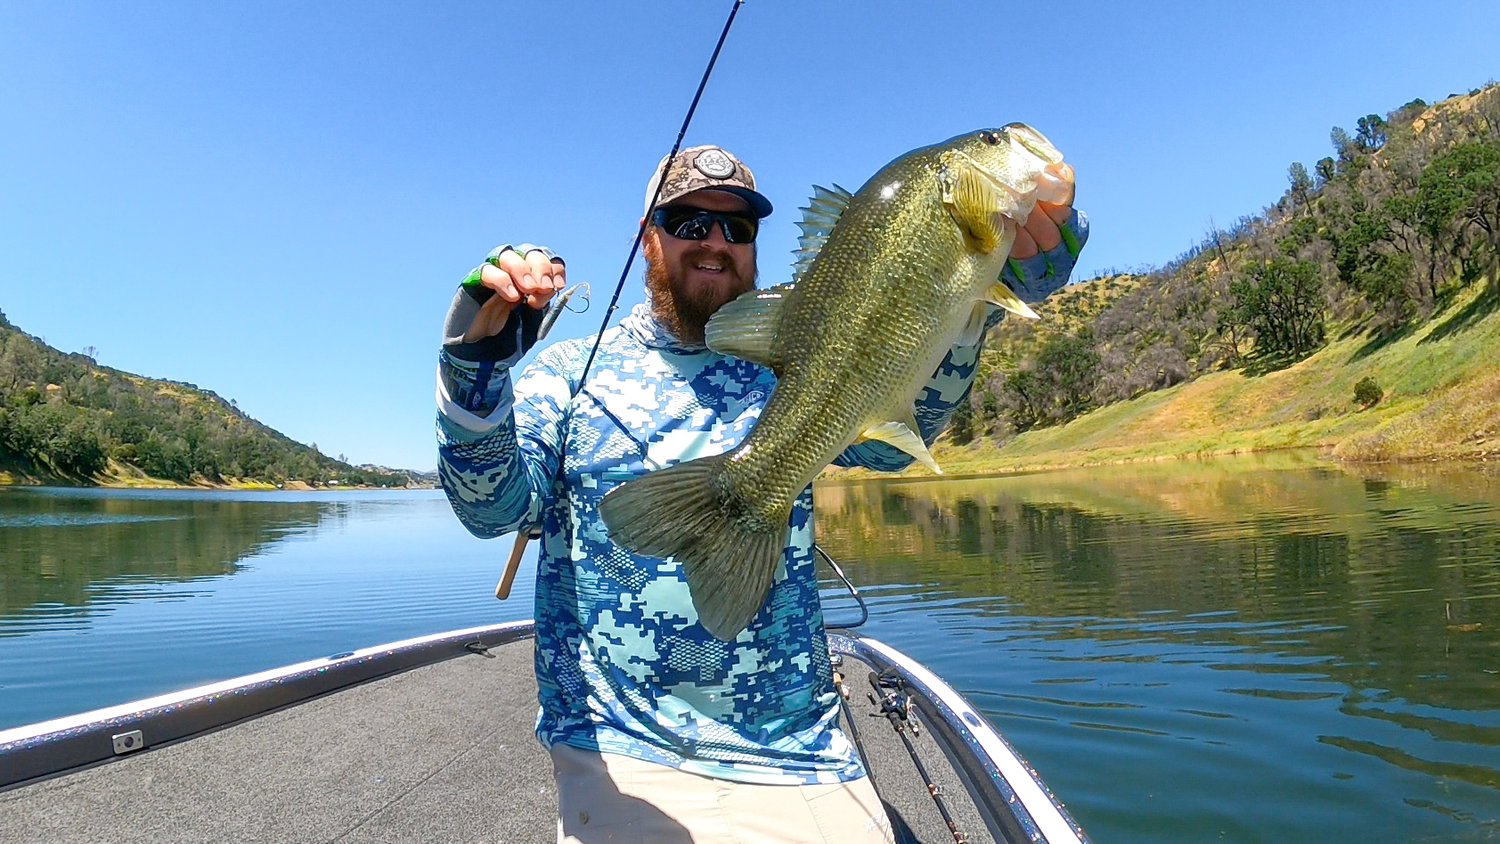 Catch Fish All Day! Targeting Bass With High Sun And Hot Weather